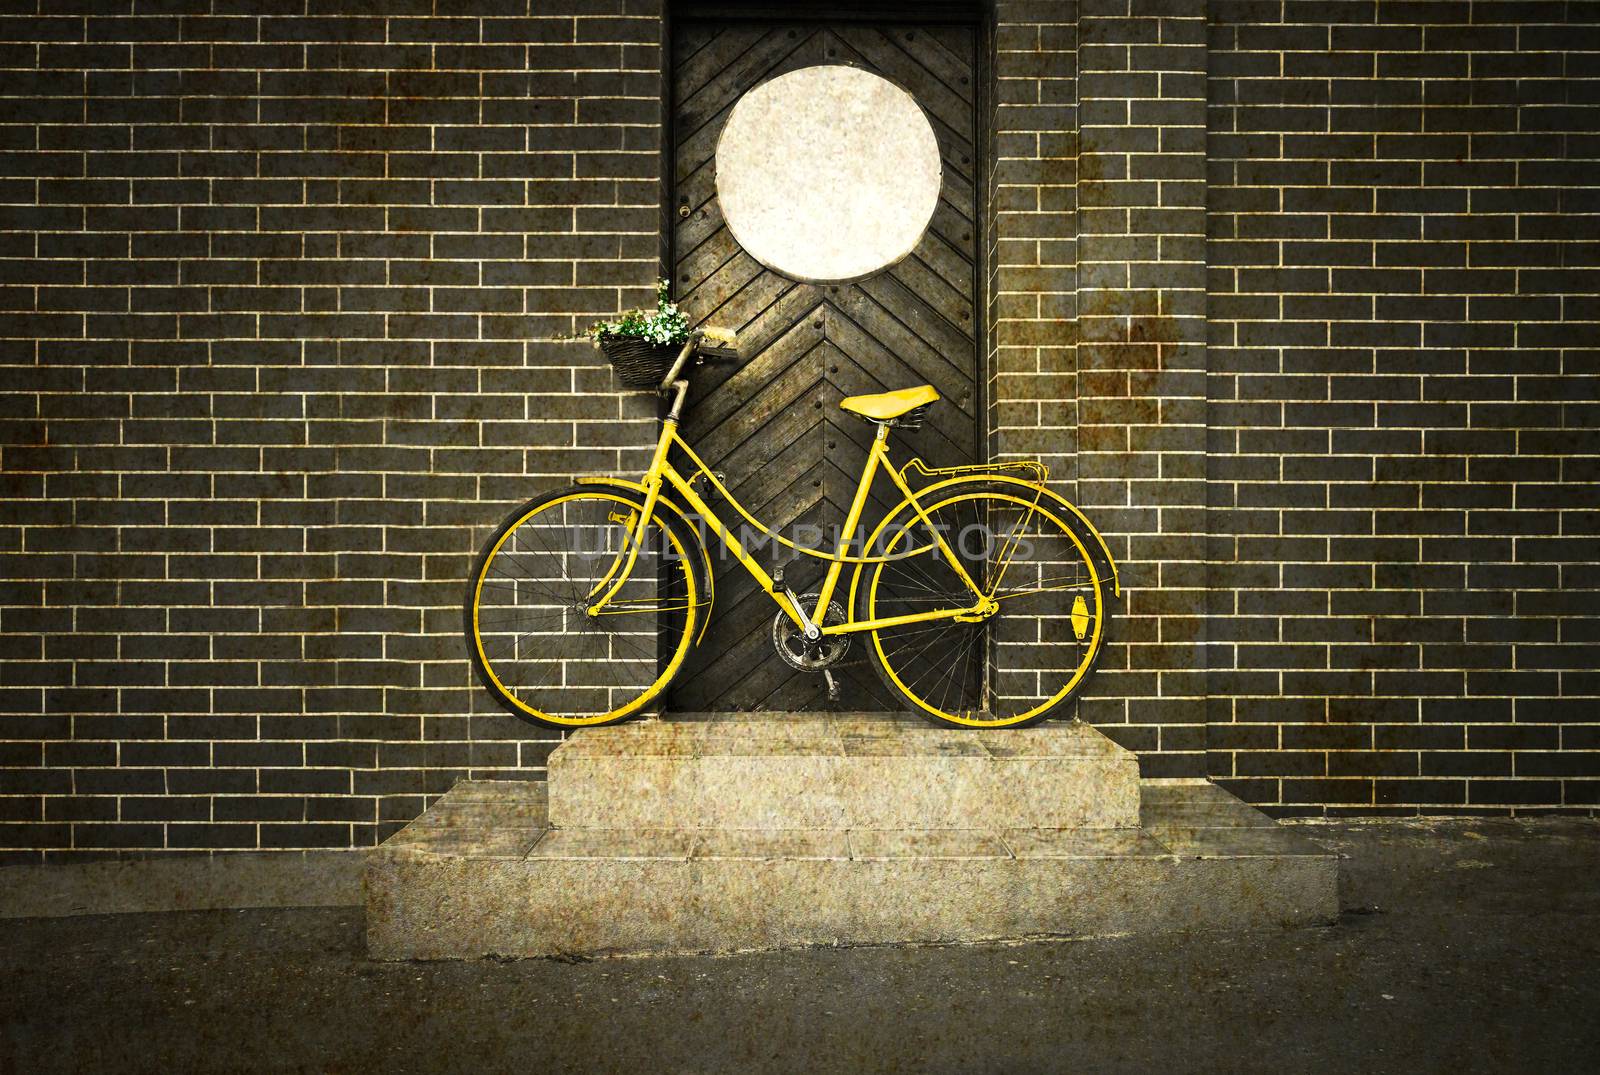 Vintage retro old yellow bike on the street. Grunge retro stylized picture.